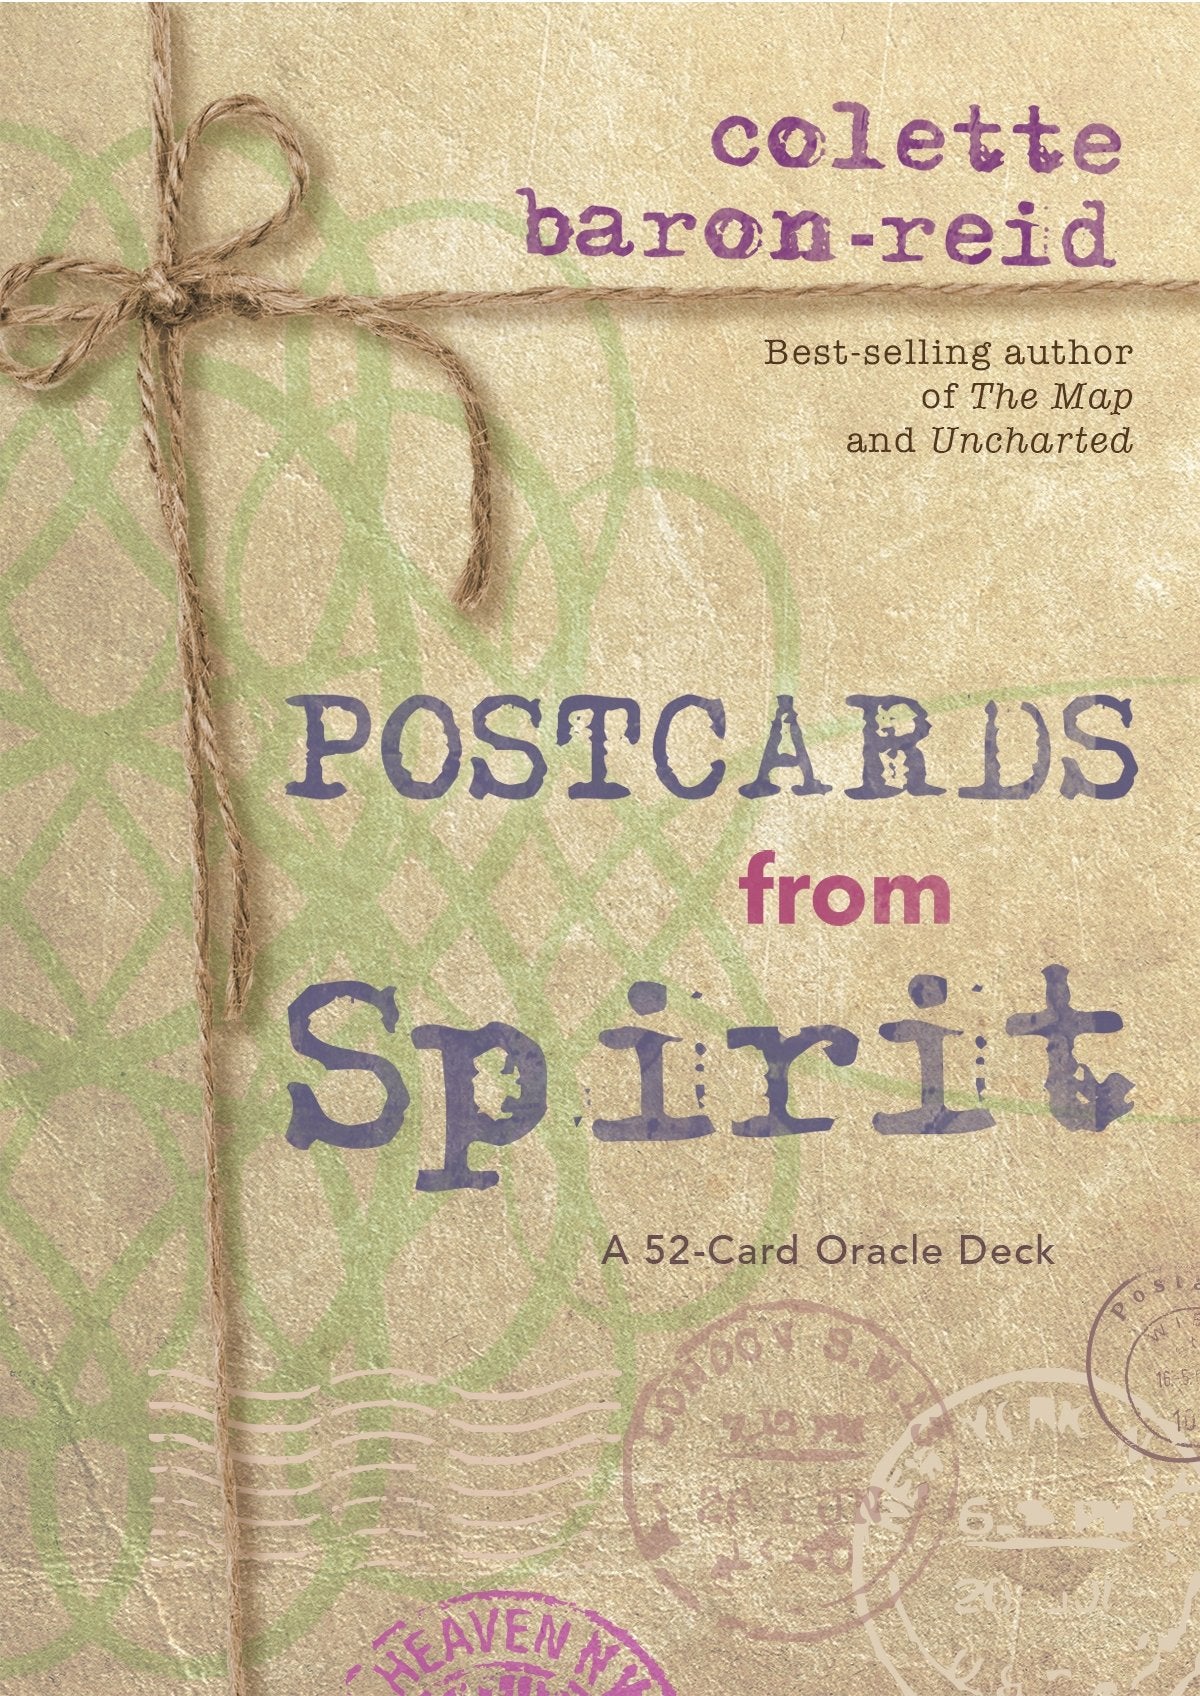 Postcards from Spirit: A 52-Card Oracle Deck || Colette Baron-Reid